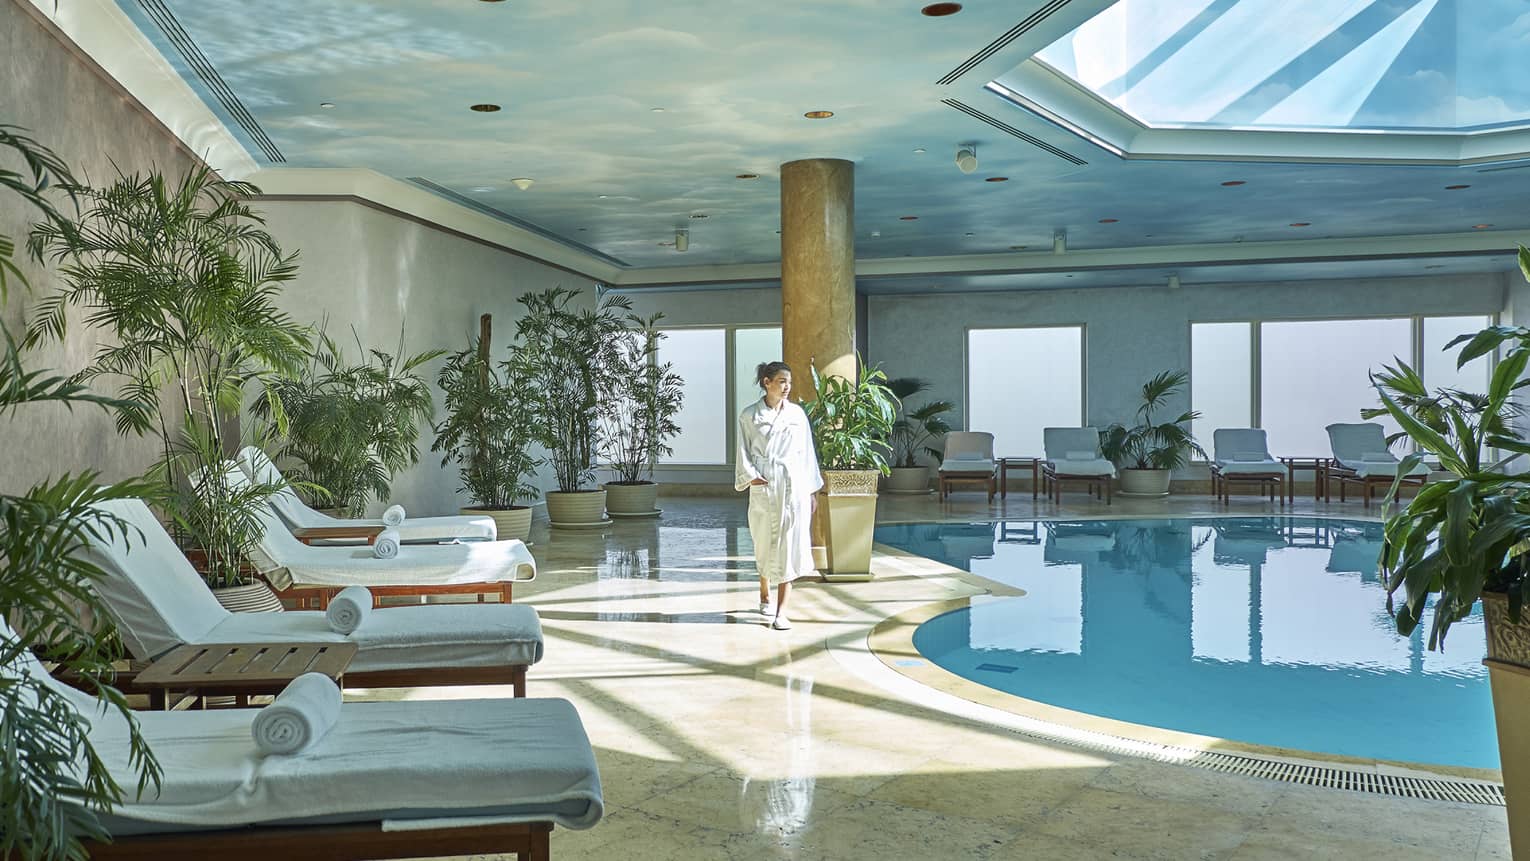 Woman in white bathroom walks the length of the indoor pool with skylight; potted plants and pool longues surrounding